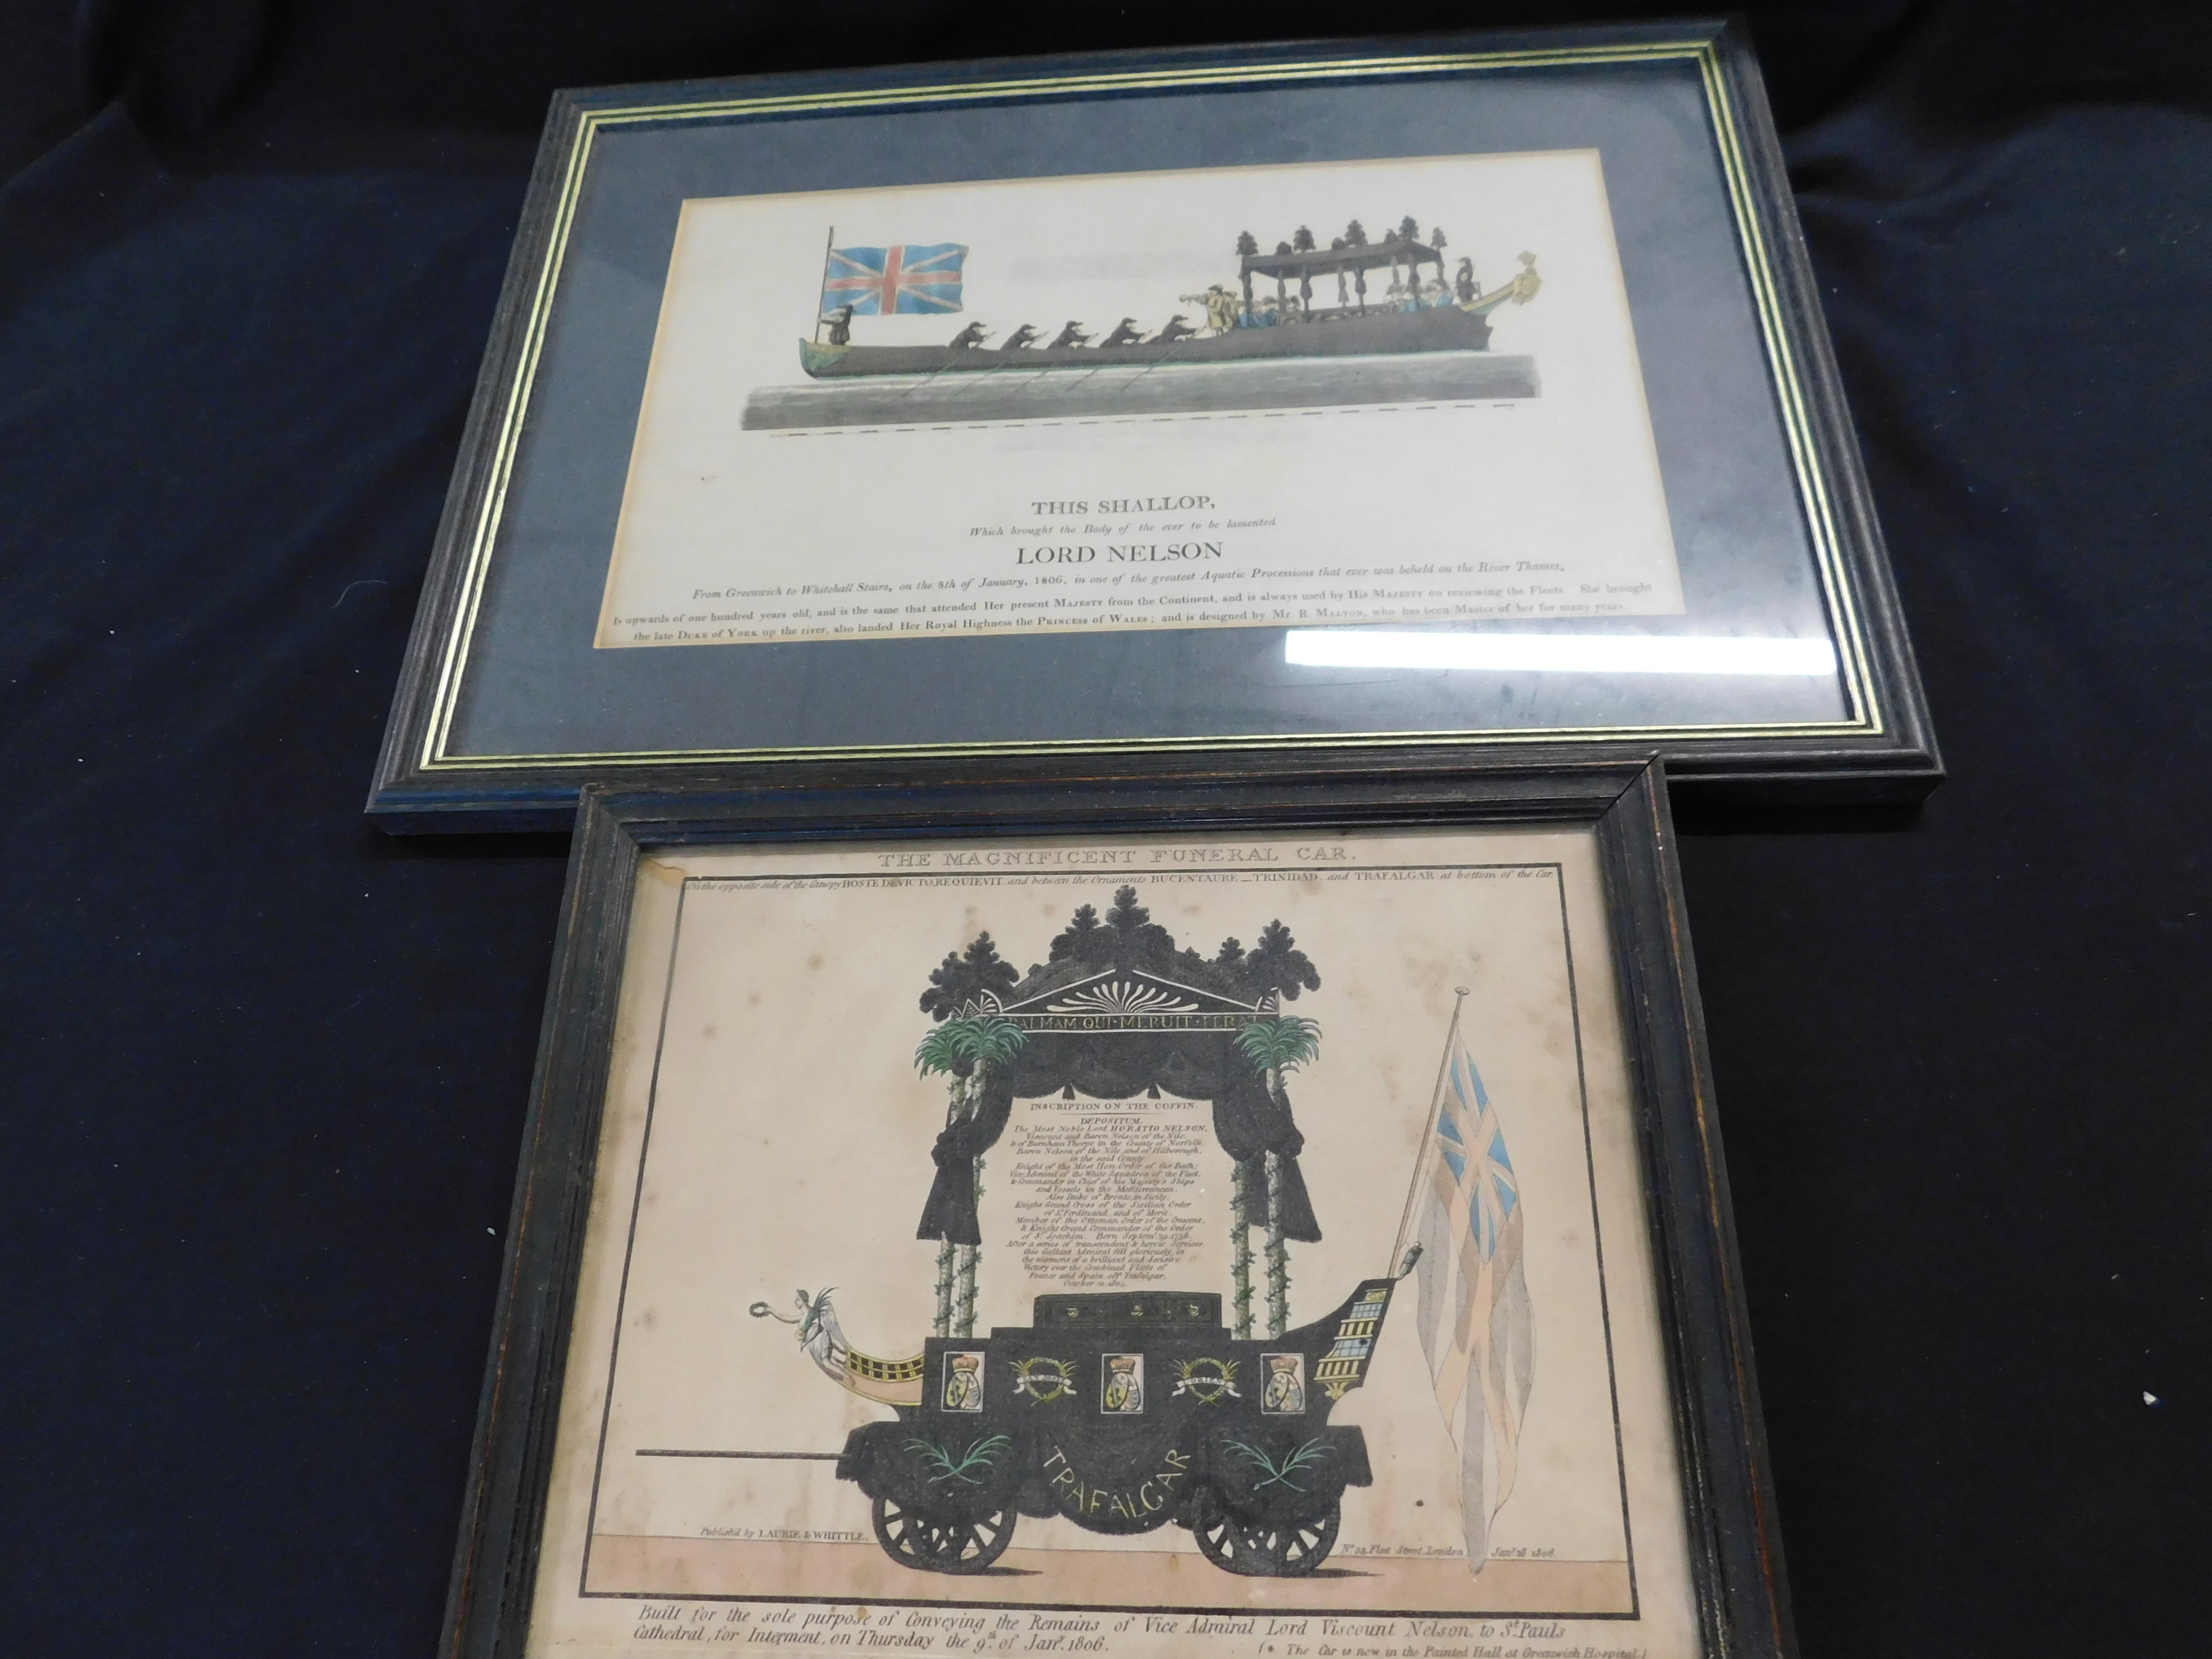 Three Admiral Horatio Lord Nelson 1806 funeral prints comprising "The Magnificent Funeral Car"